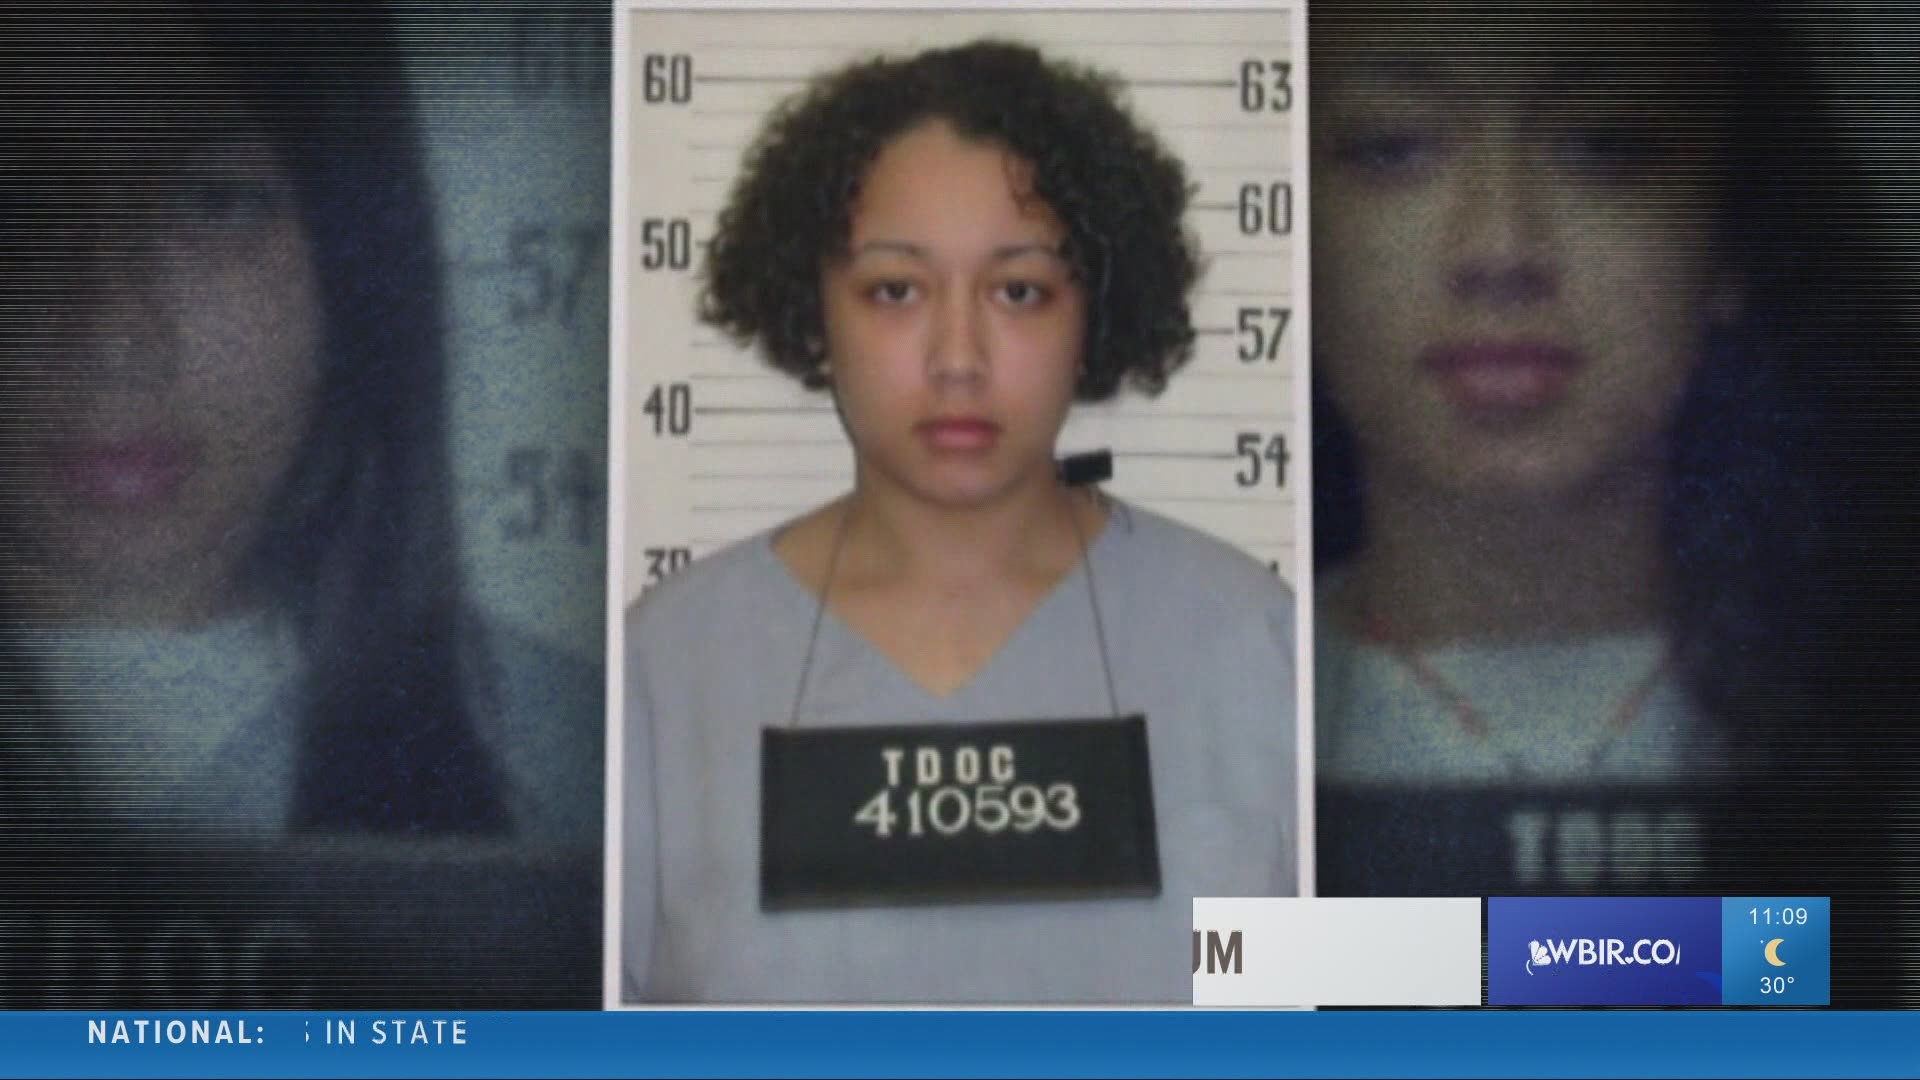 Cyntoia Brown was convicted in Tennessee of murder and robbery when was 16 years old and a victim of sex trafficking.